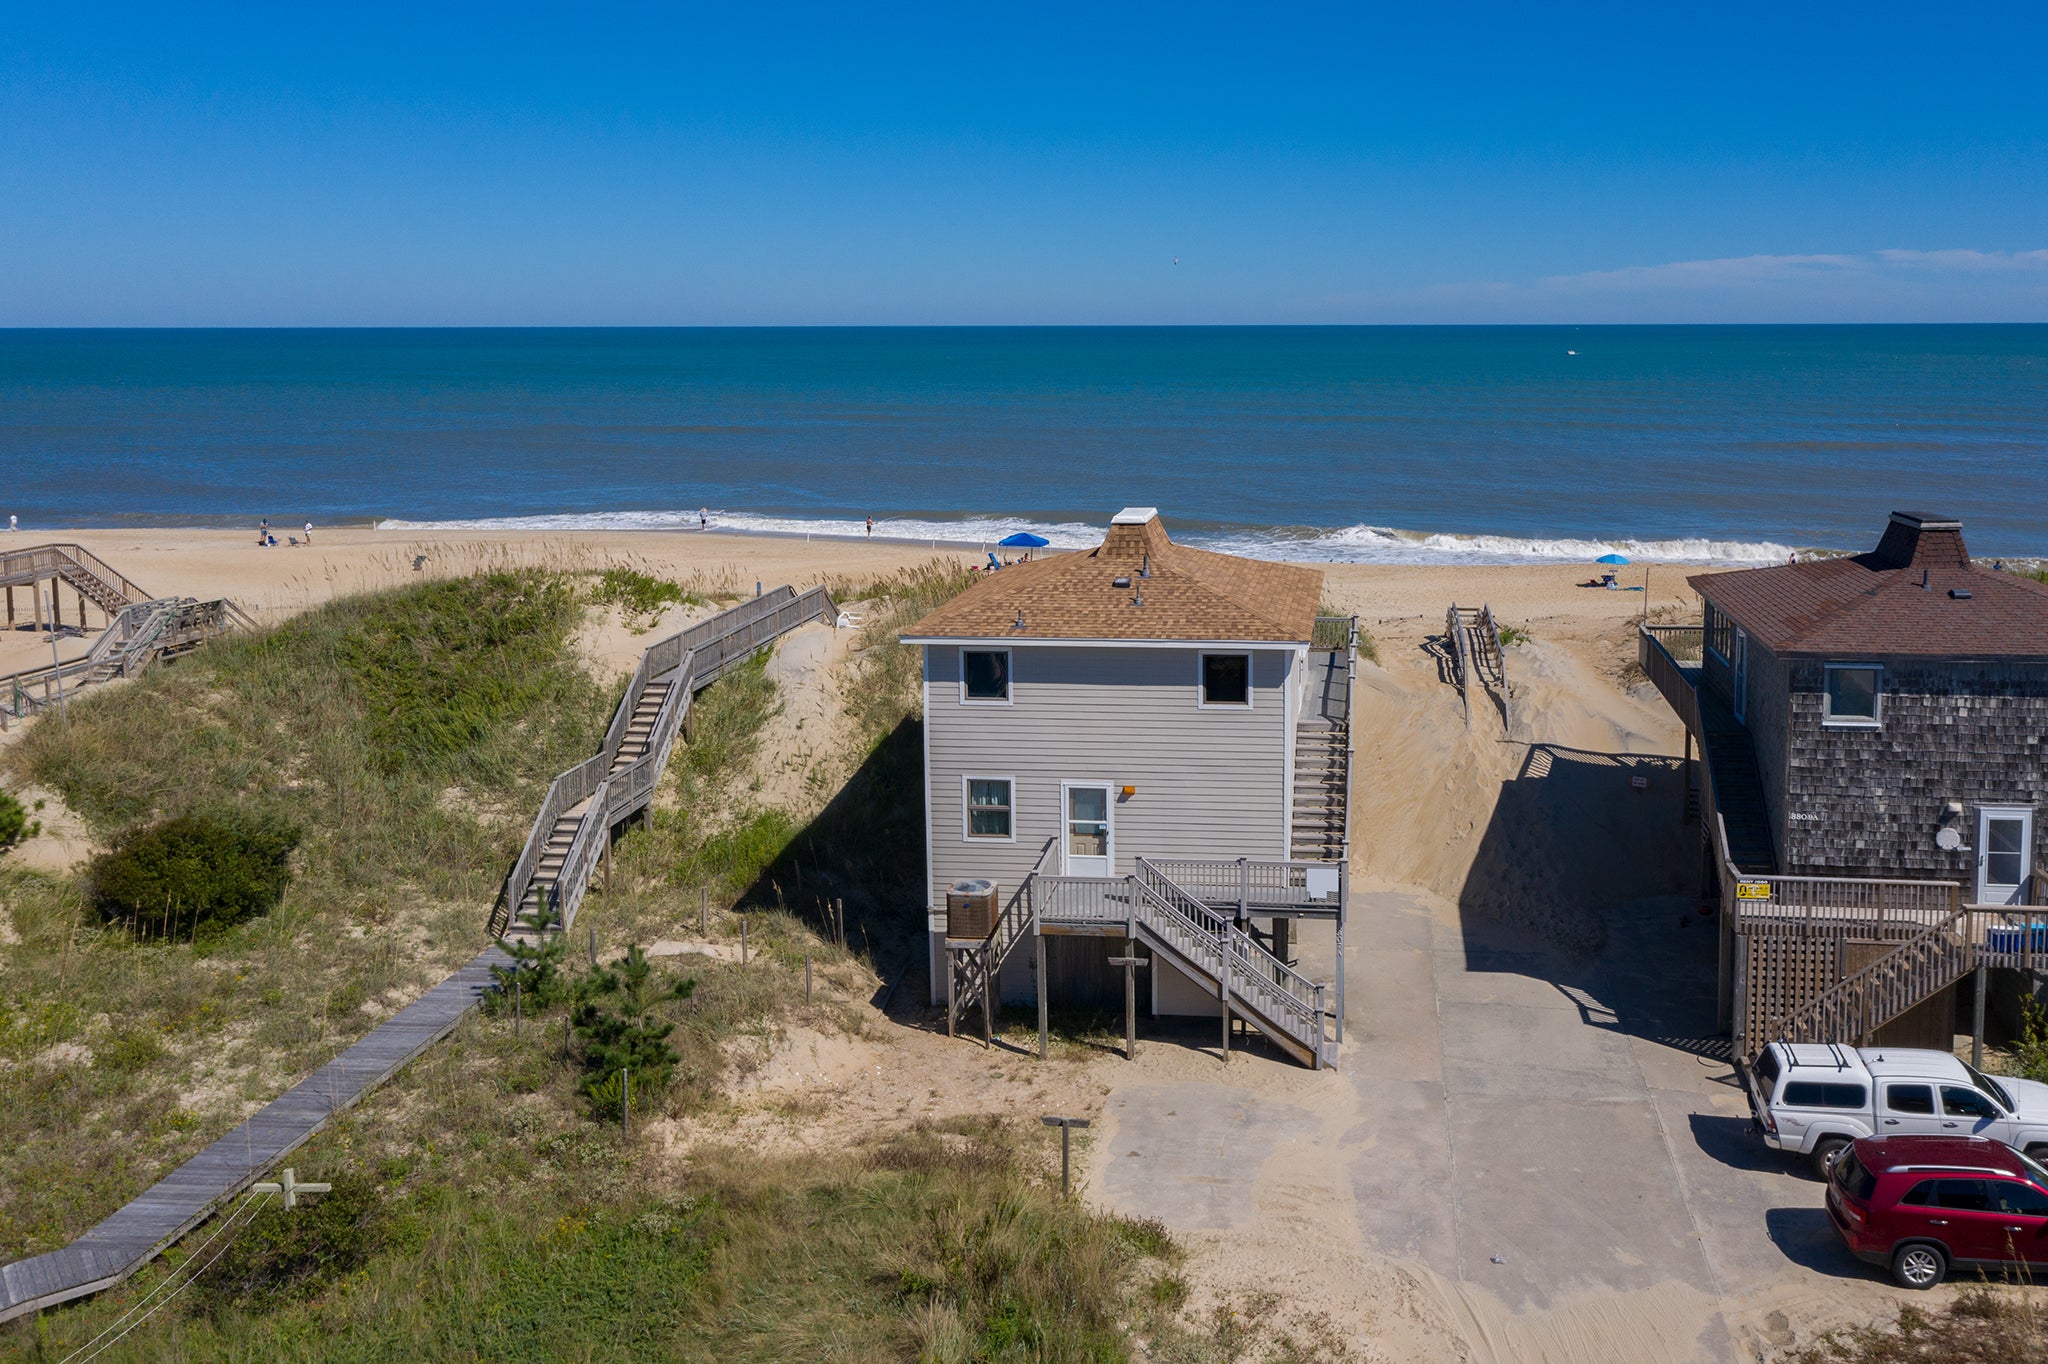 SN0407: Sailor's Rest at Nags Head l Aerial